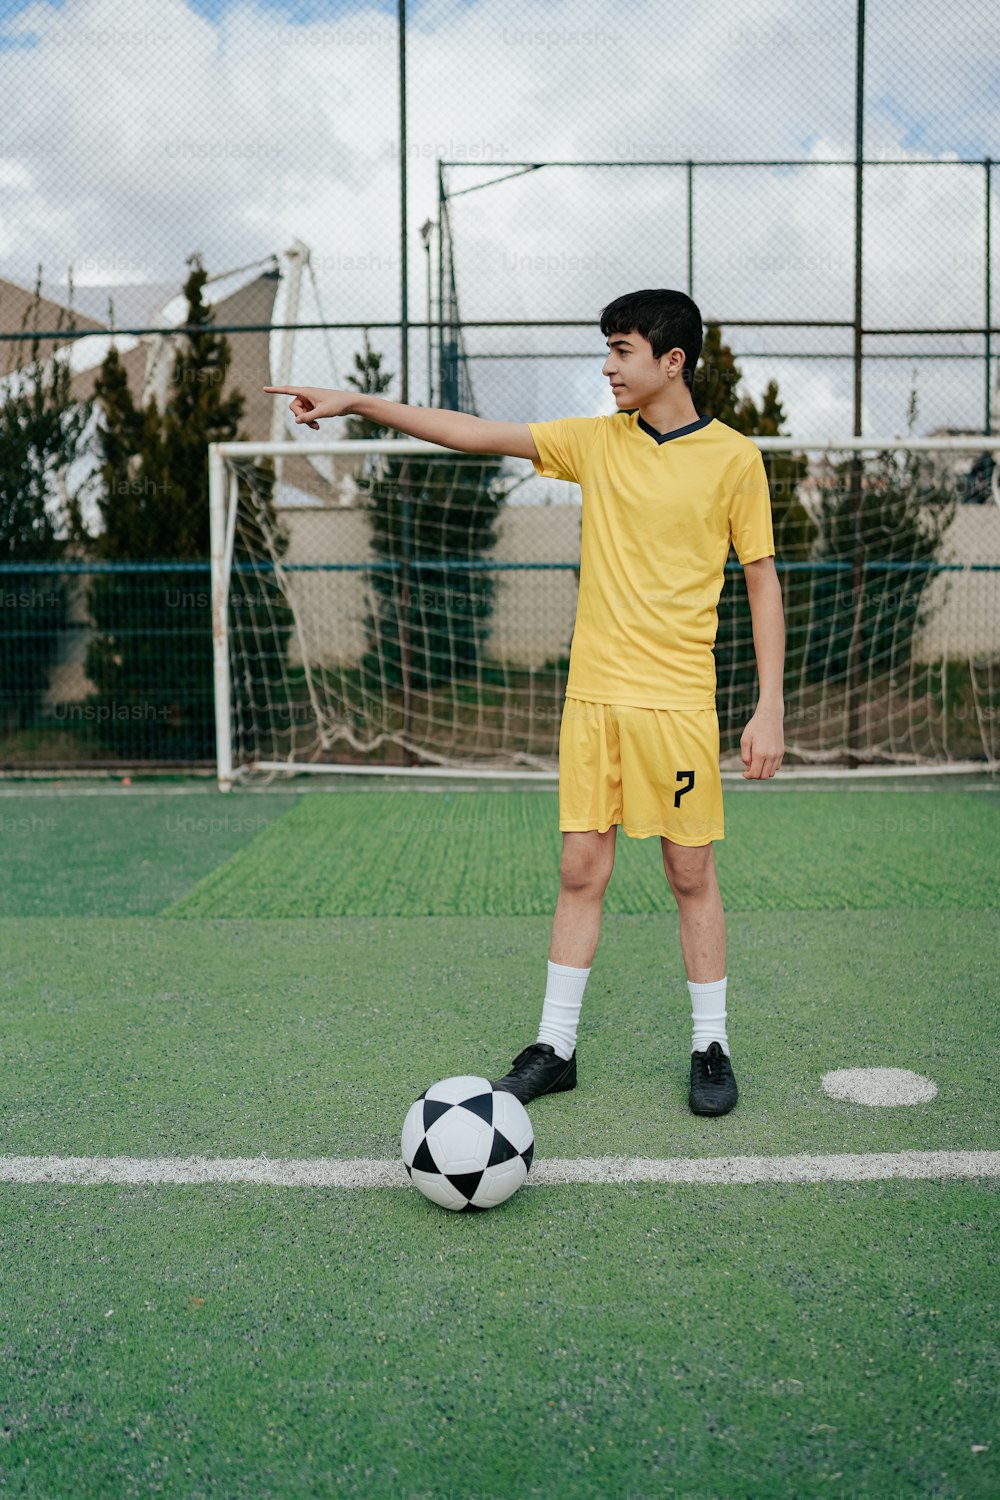 a young man in a yellow uniform kicking a soccer ball